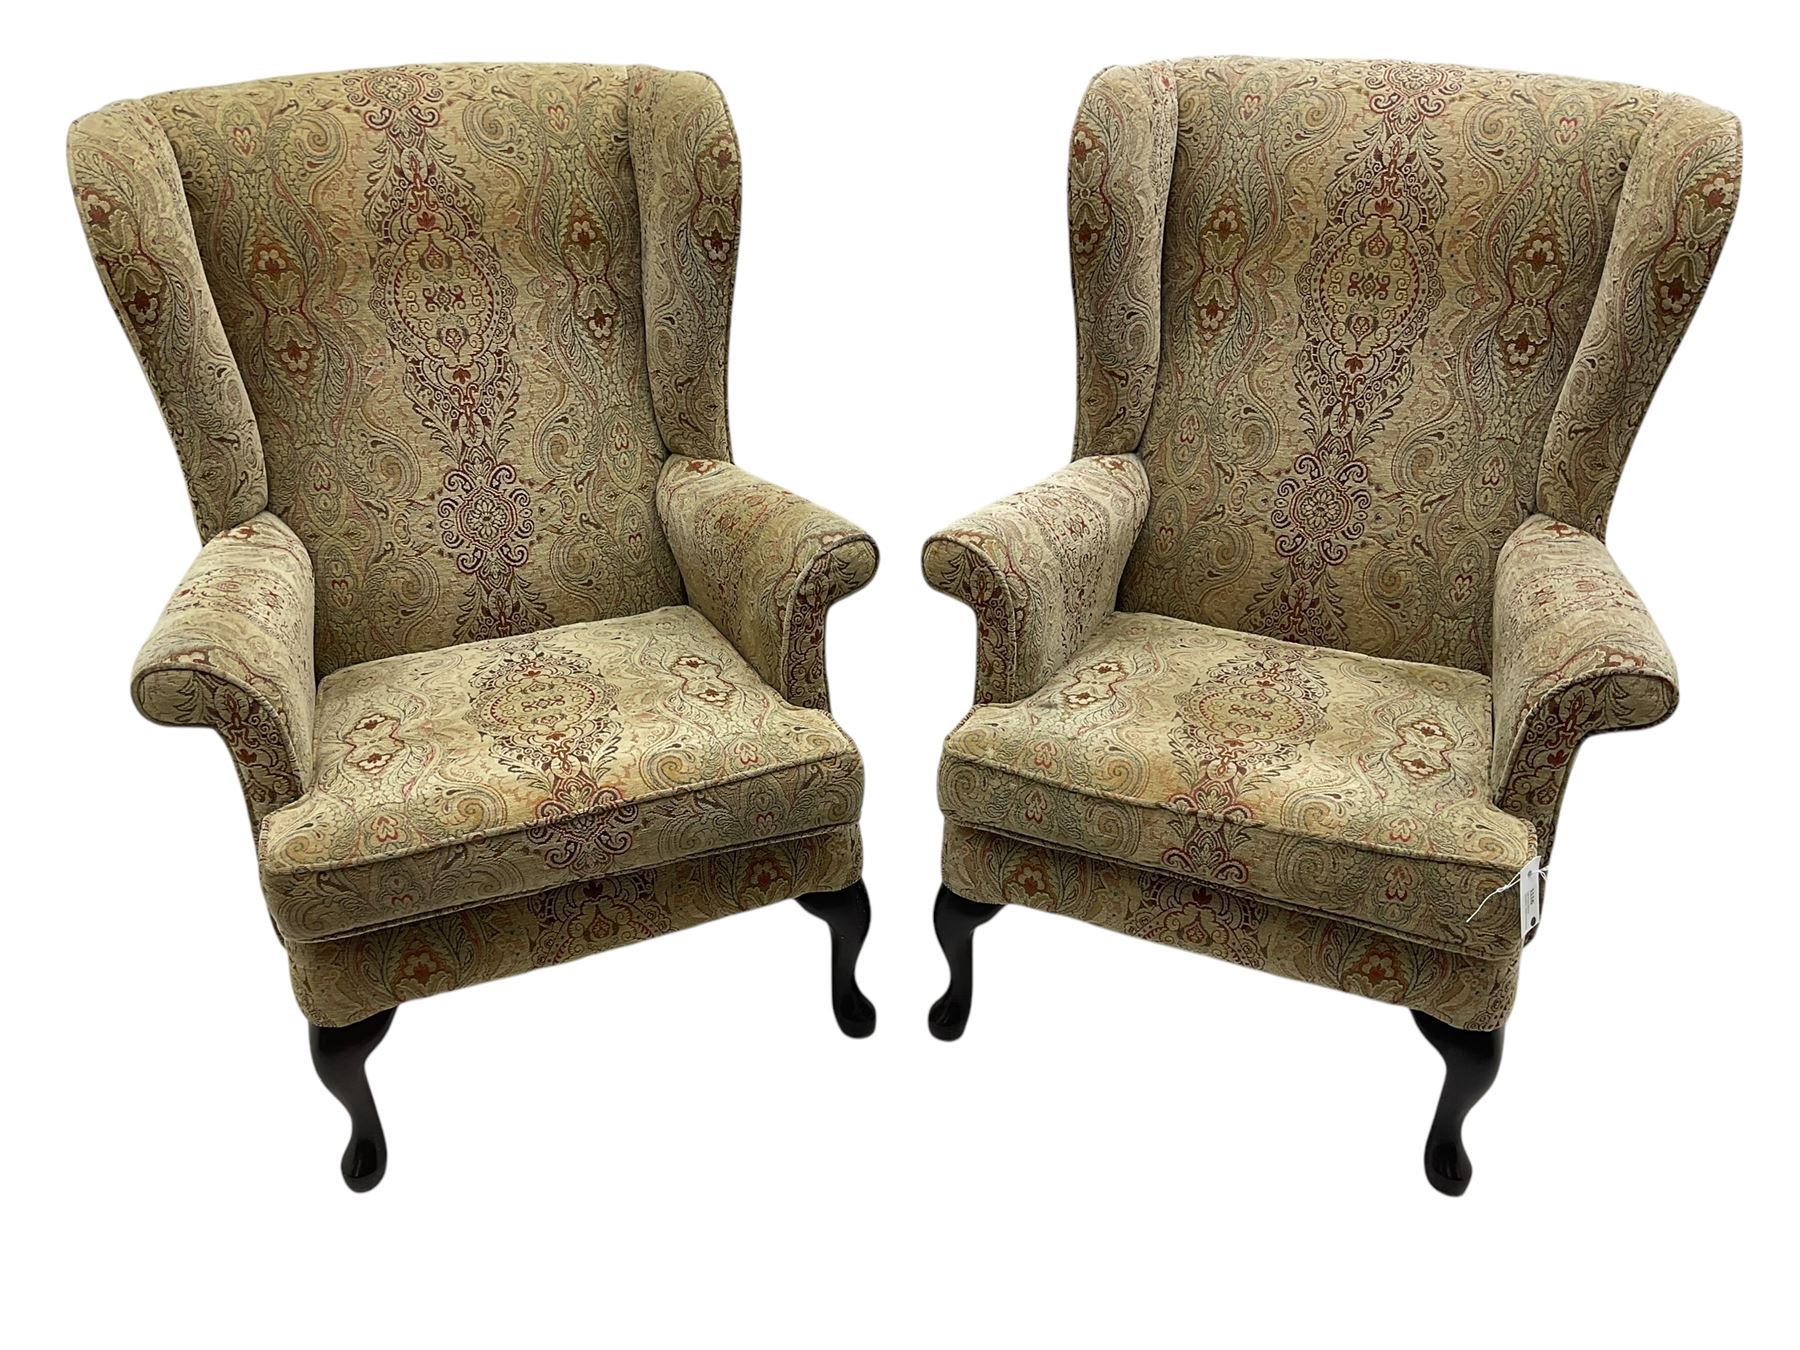 Parker Knoll - 'Burghley' pair of wingback armchairs - Image 2 of 5